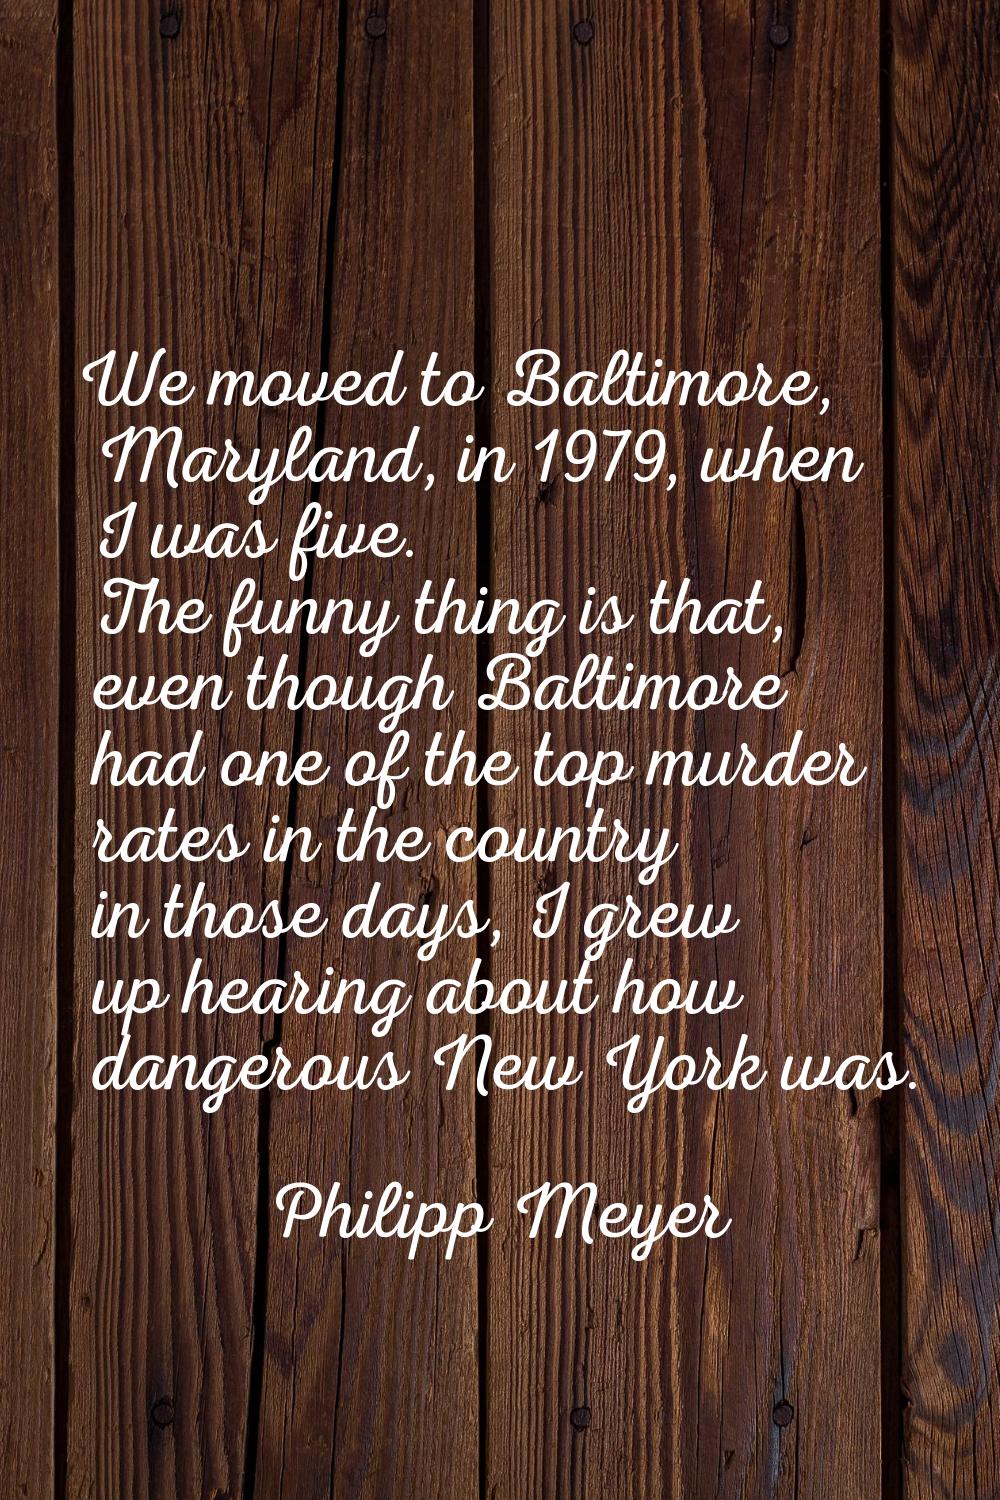 We moved to Baltimore, Maryland, in 1979, when I was five. The funny thing is that, even though Bal